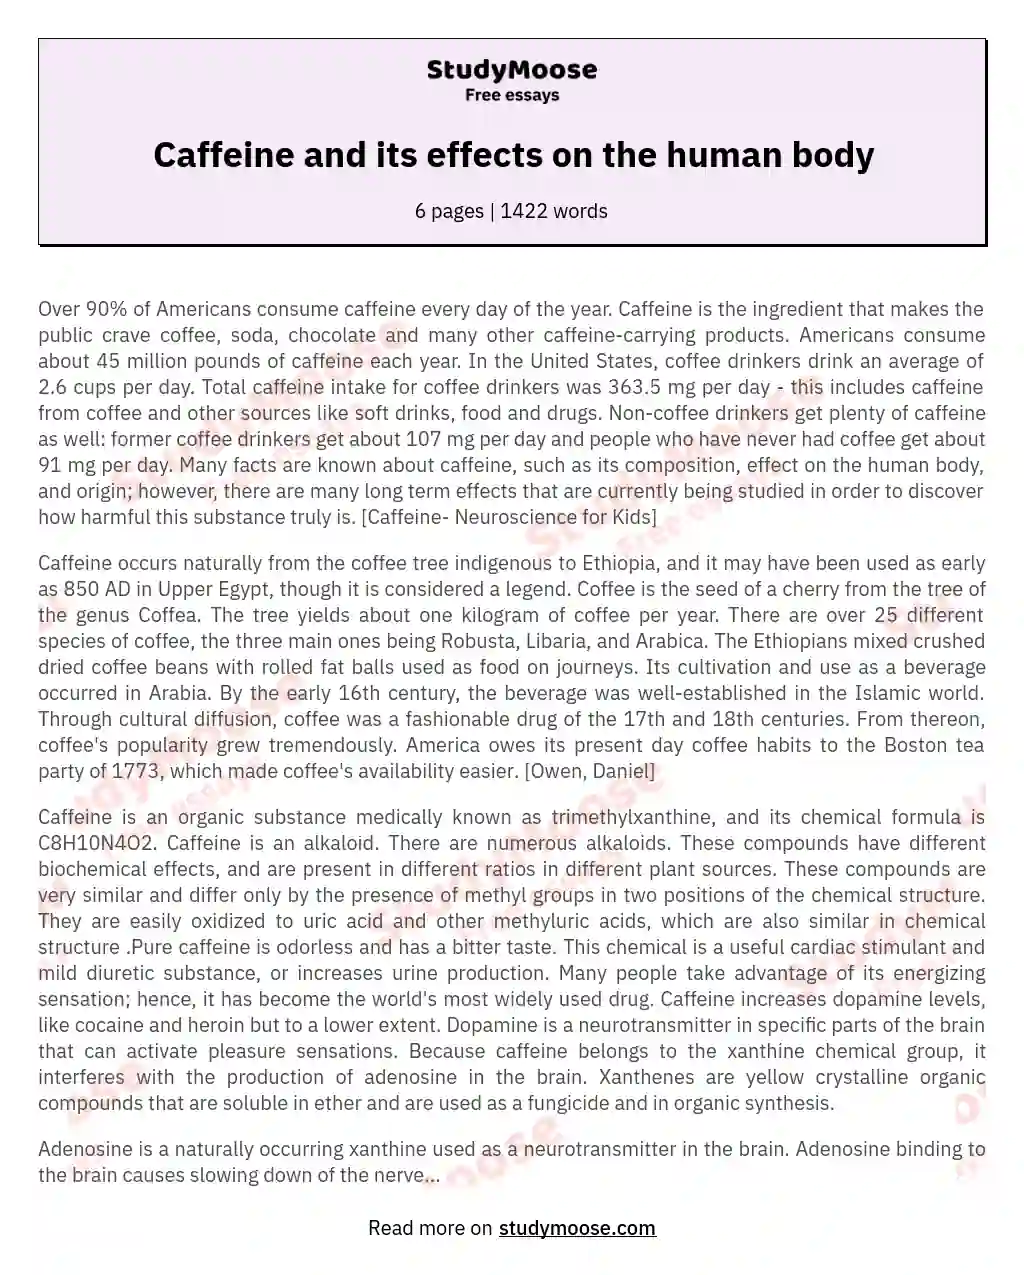 Caffeine and its effects on the human body essay